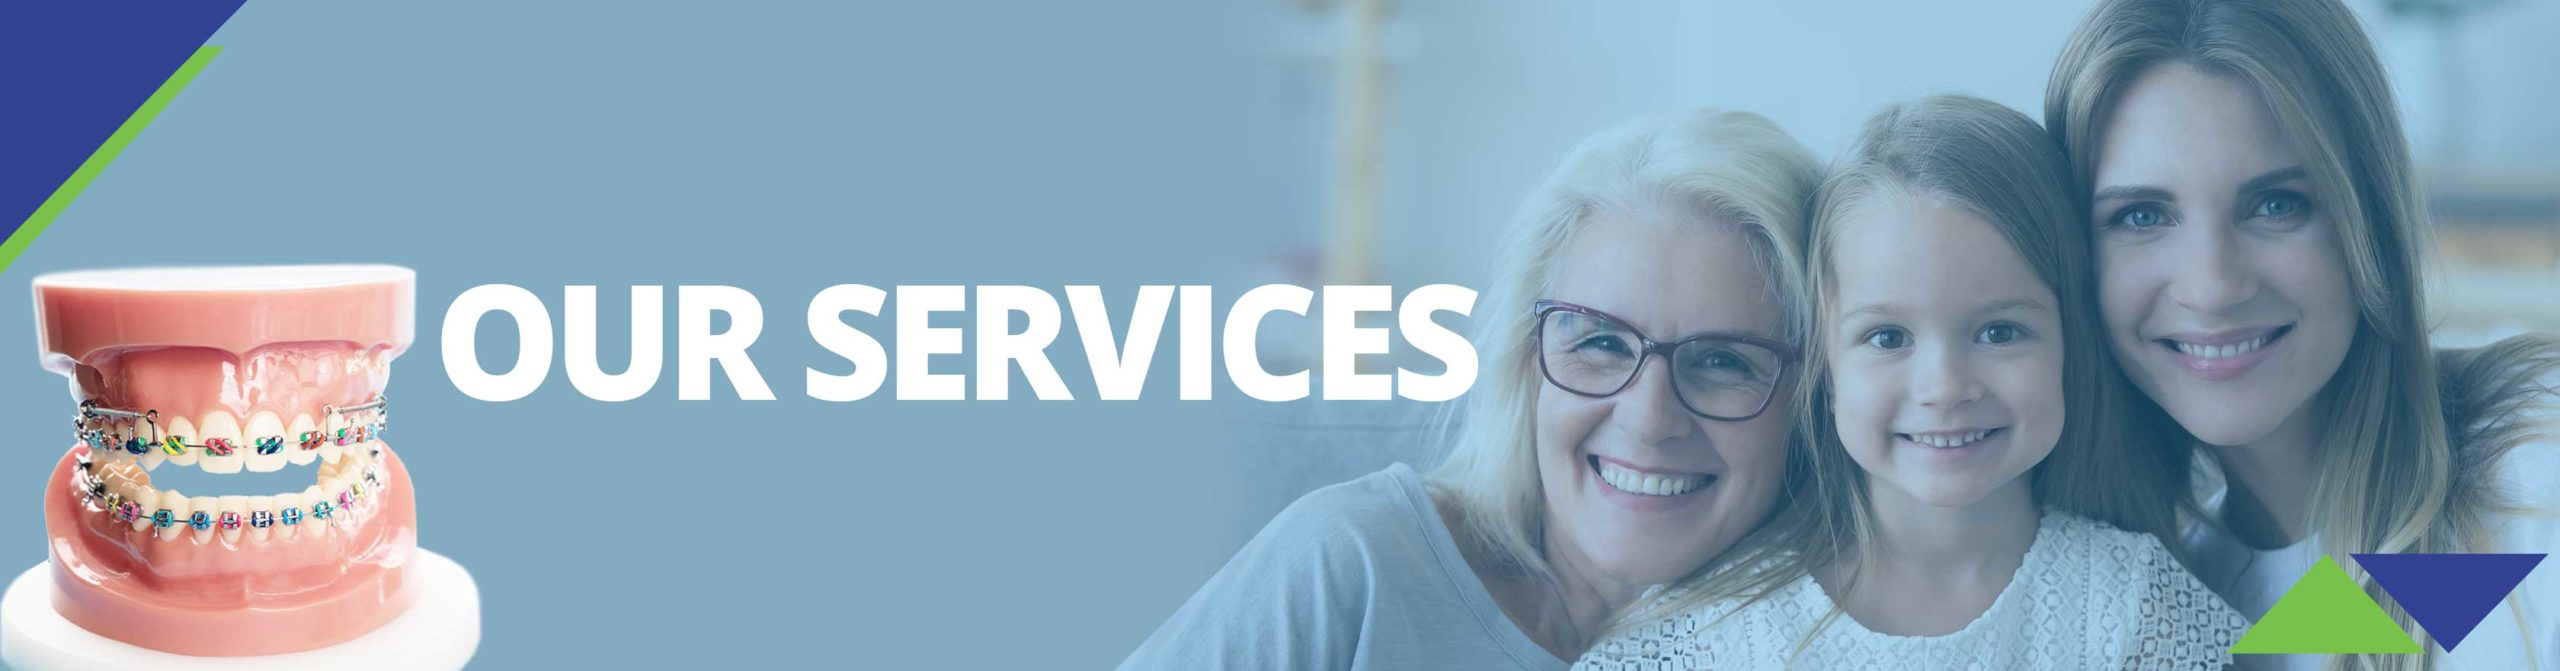 Our Services Header